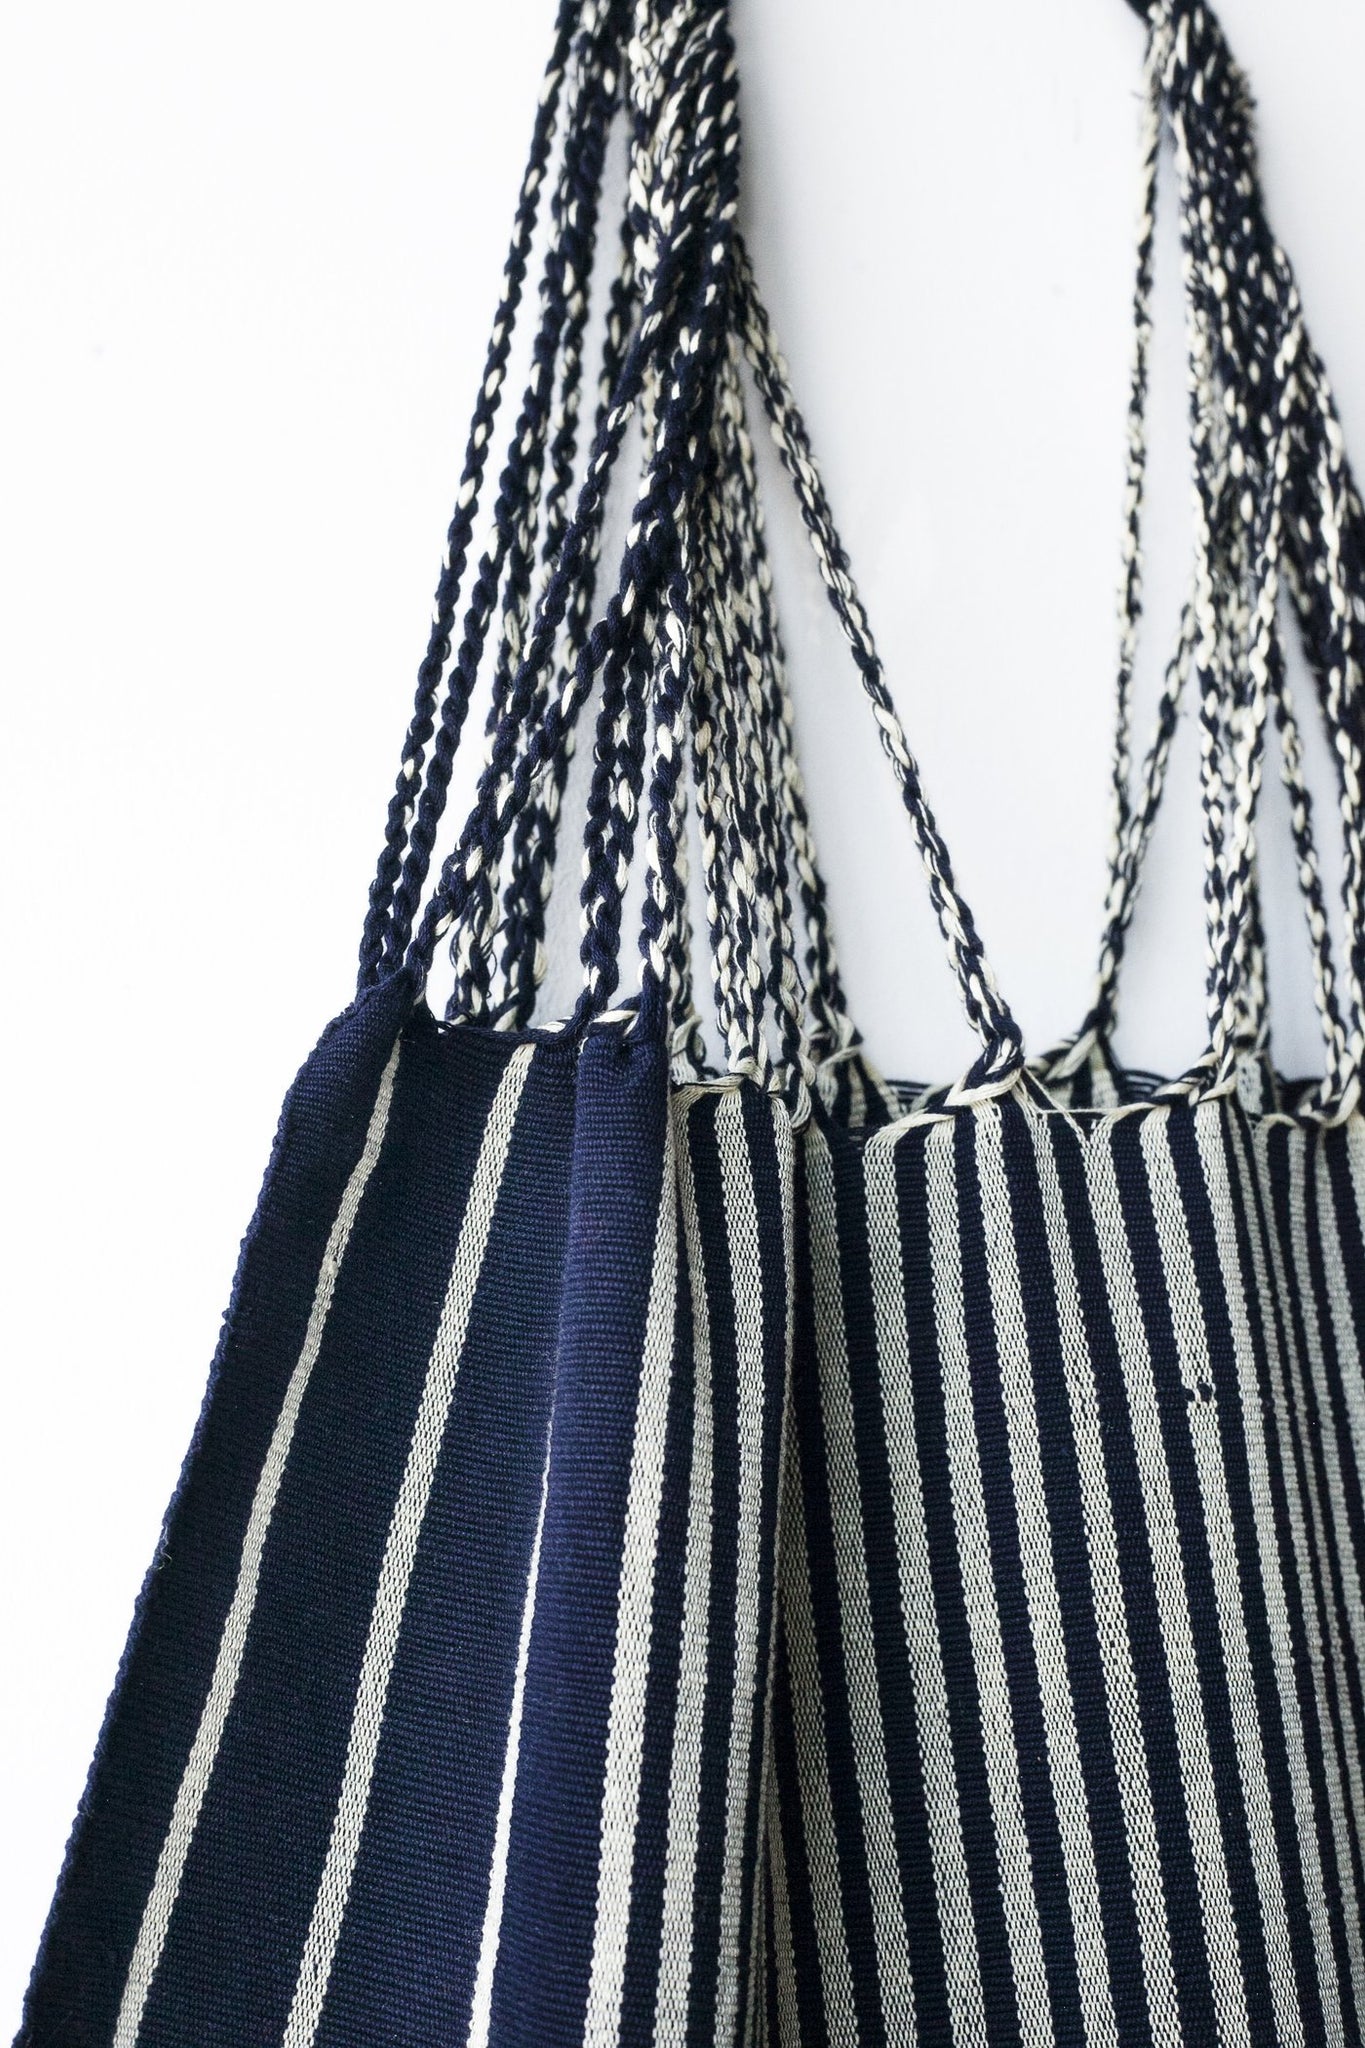 Navy Hammock Bag by The Global Trunk. Handwoven in Mexico. These little tote bags are perfect for going to the market or the beach! Each Hammock Bag is handwoven on a back-strap loom by artisans in the highland region of Chiapas, Mexico. Color navy. 100% cotton.